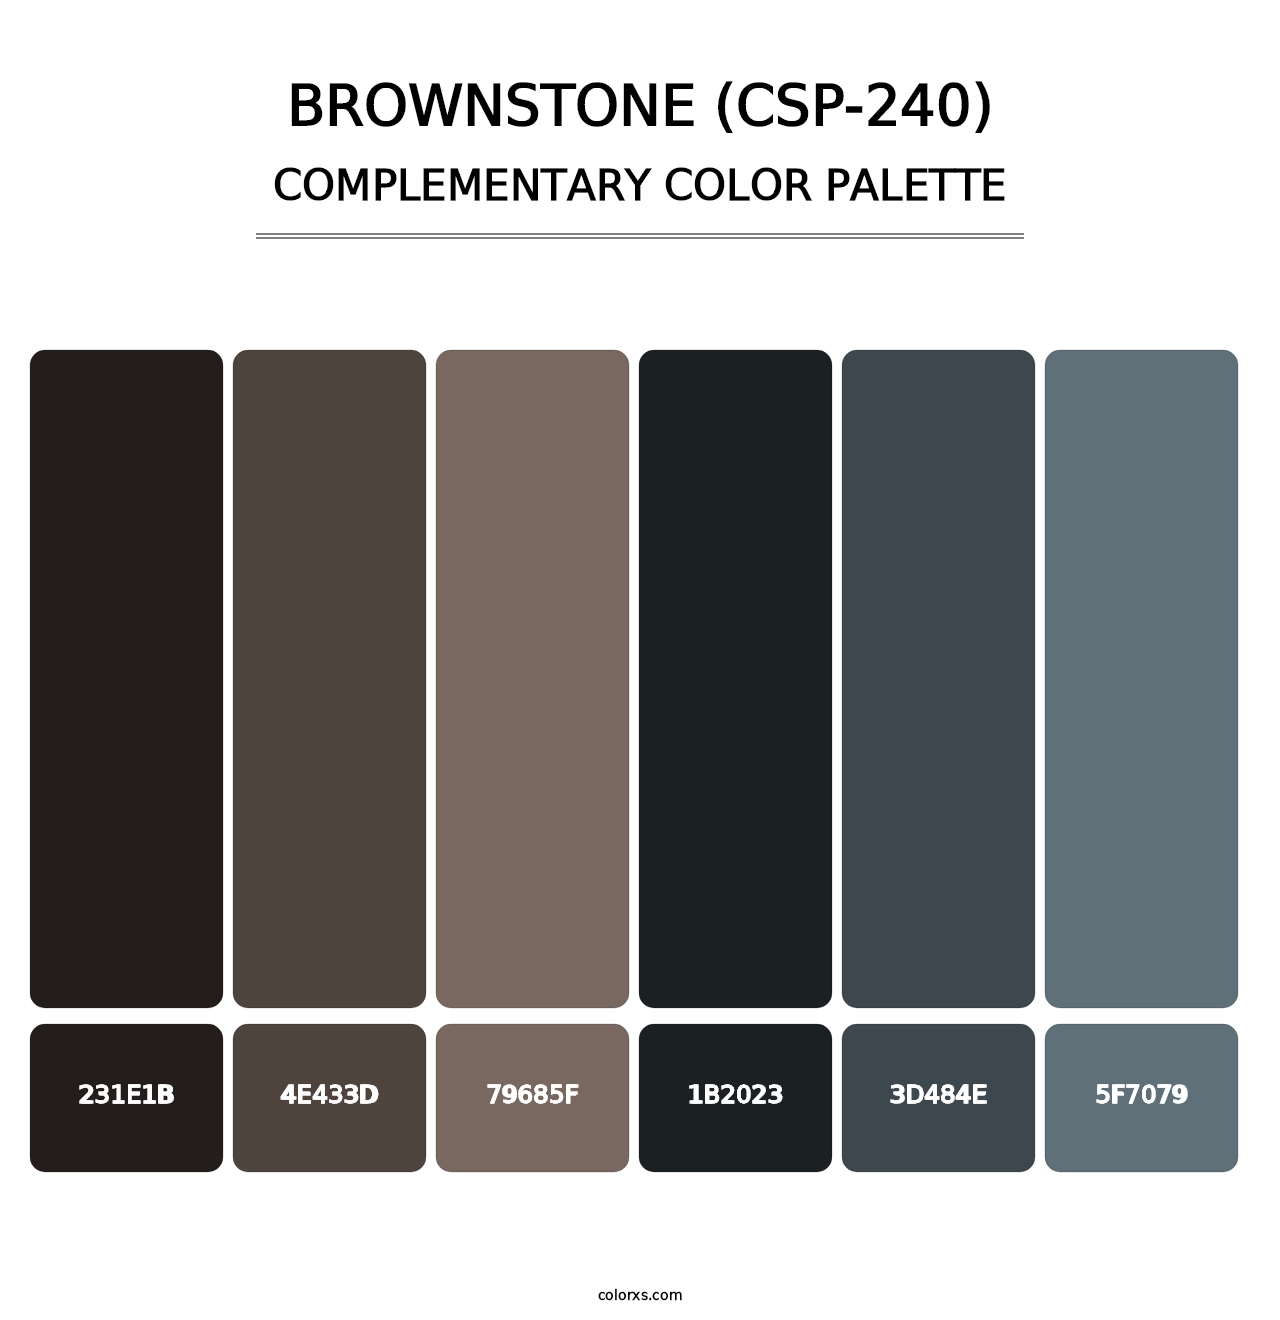 Brownstone (CSP-240) - Complementary Color Palette